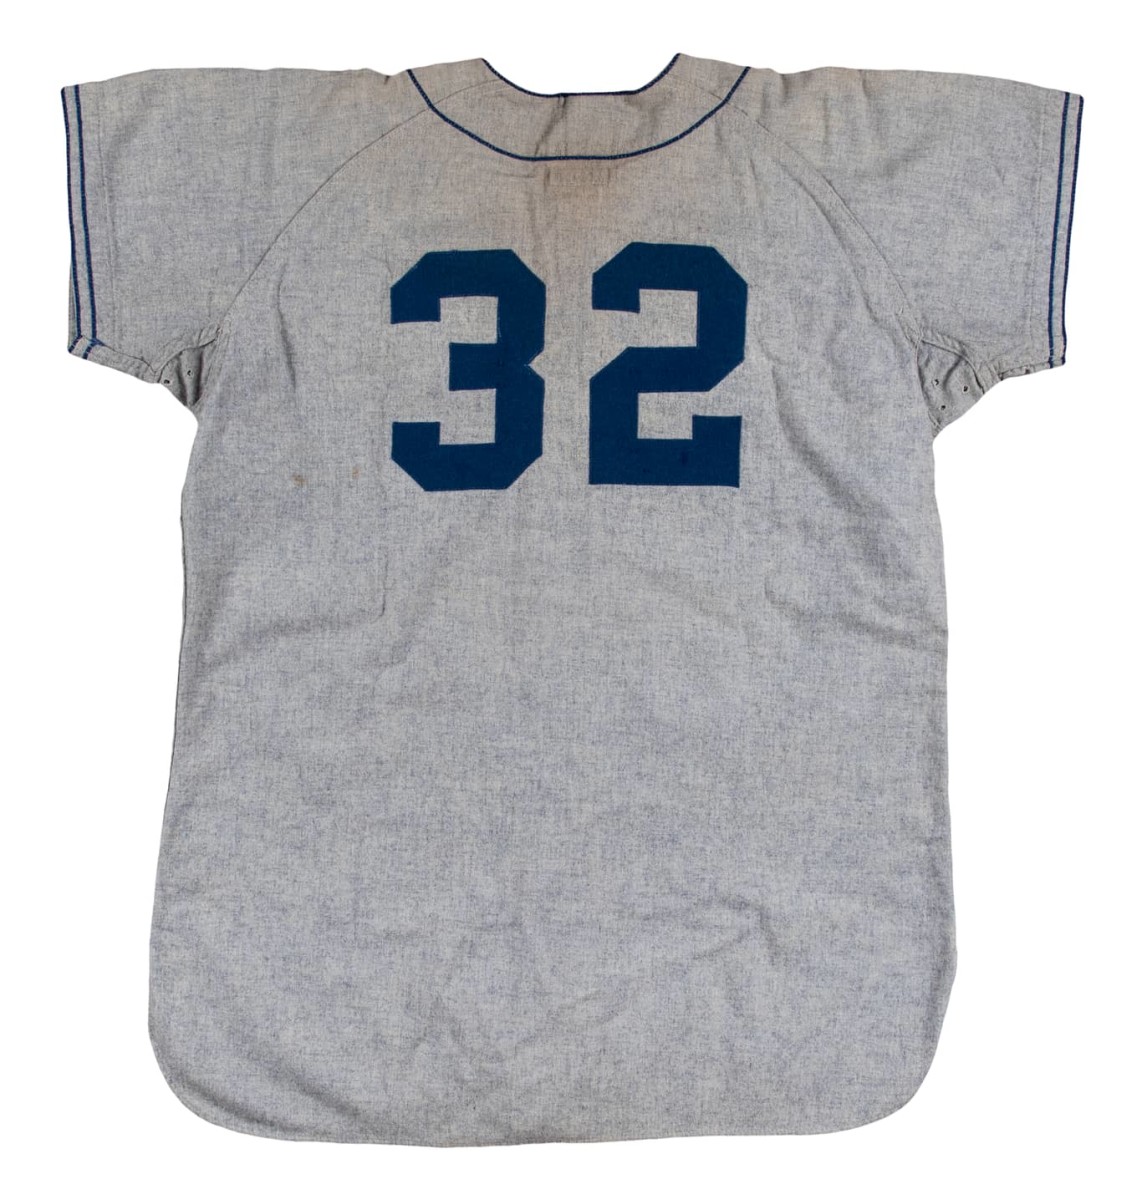 A Sandy Koufax game-used Brooklyn Dodgers road jersey from his 1955 debut season and World Series.